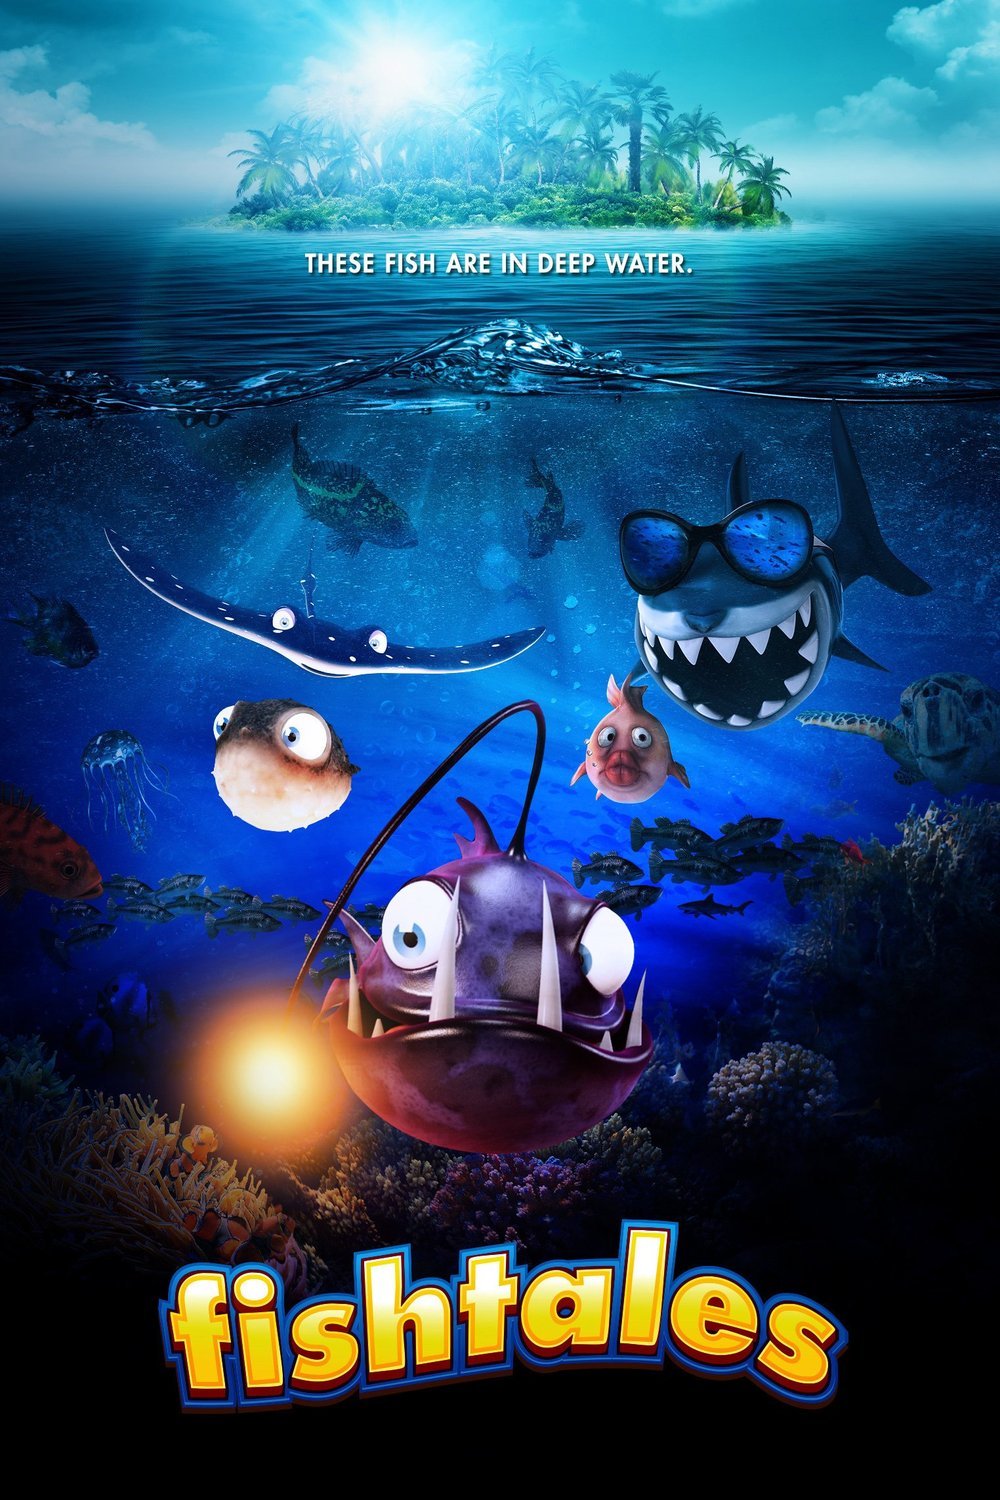 Poster of the movie Fishtales